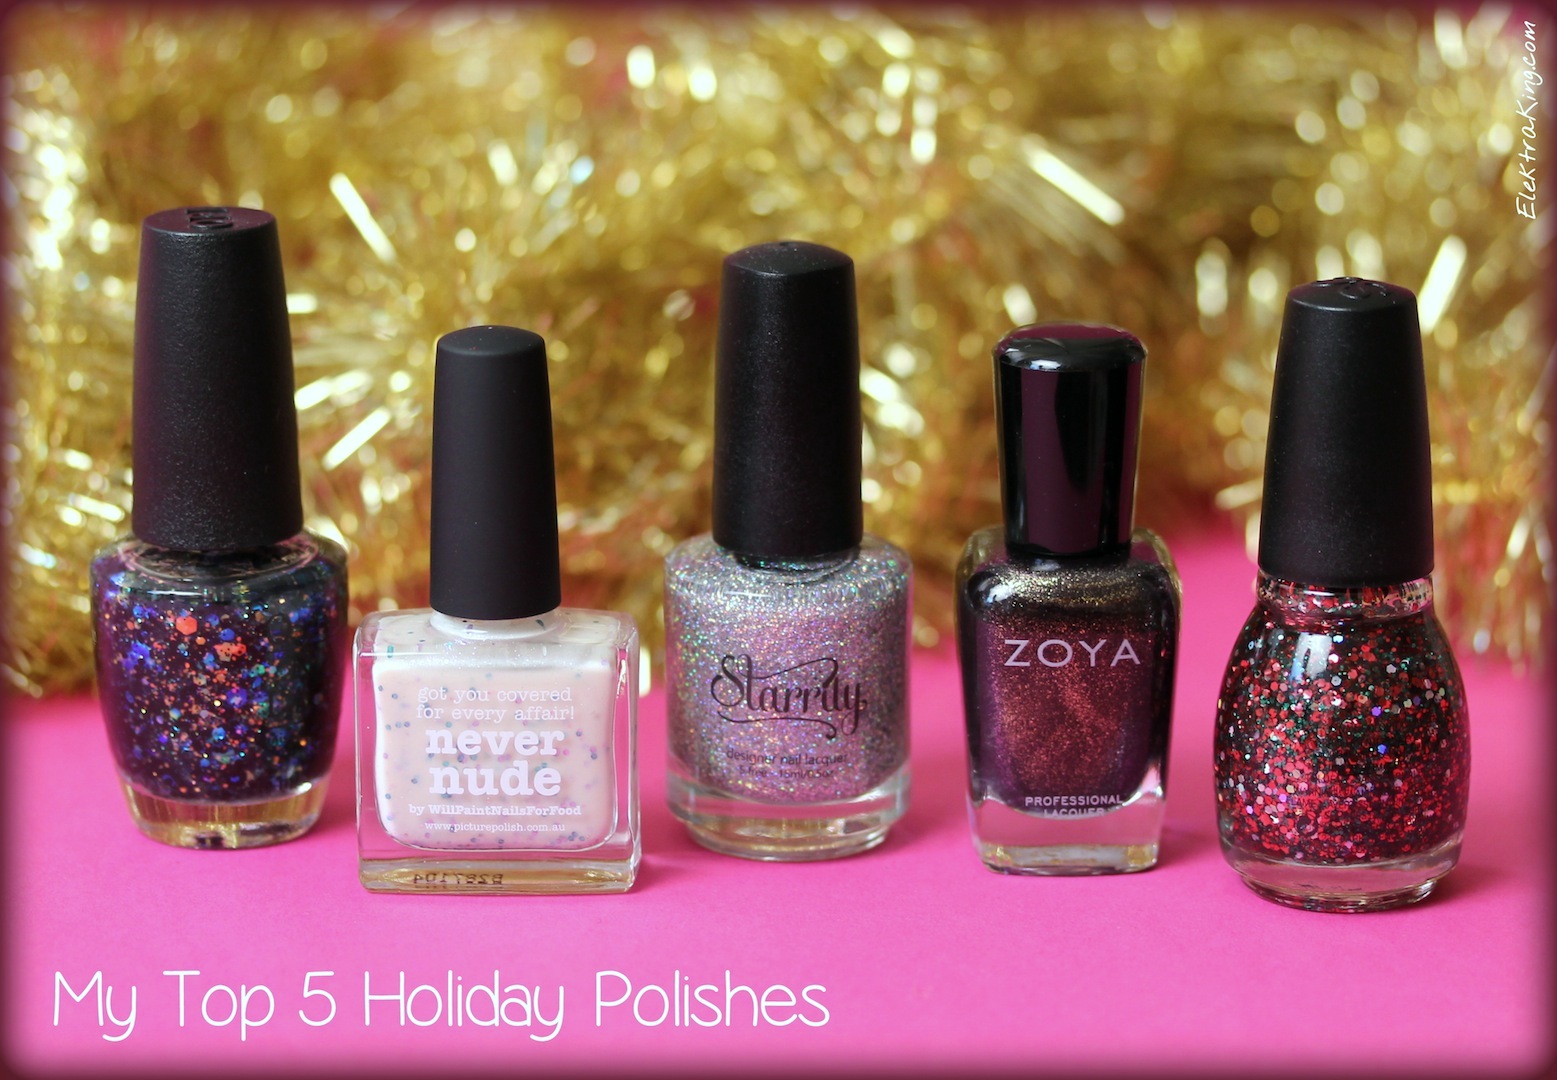 My Top 5 Holiday Polishes 2014 {December 23}